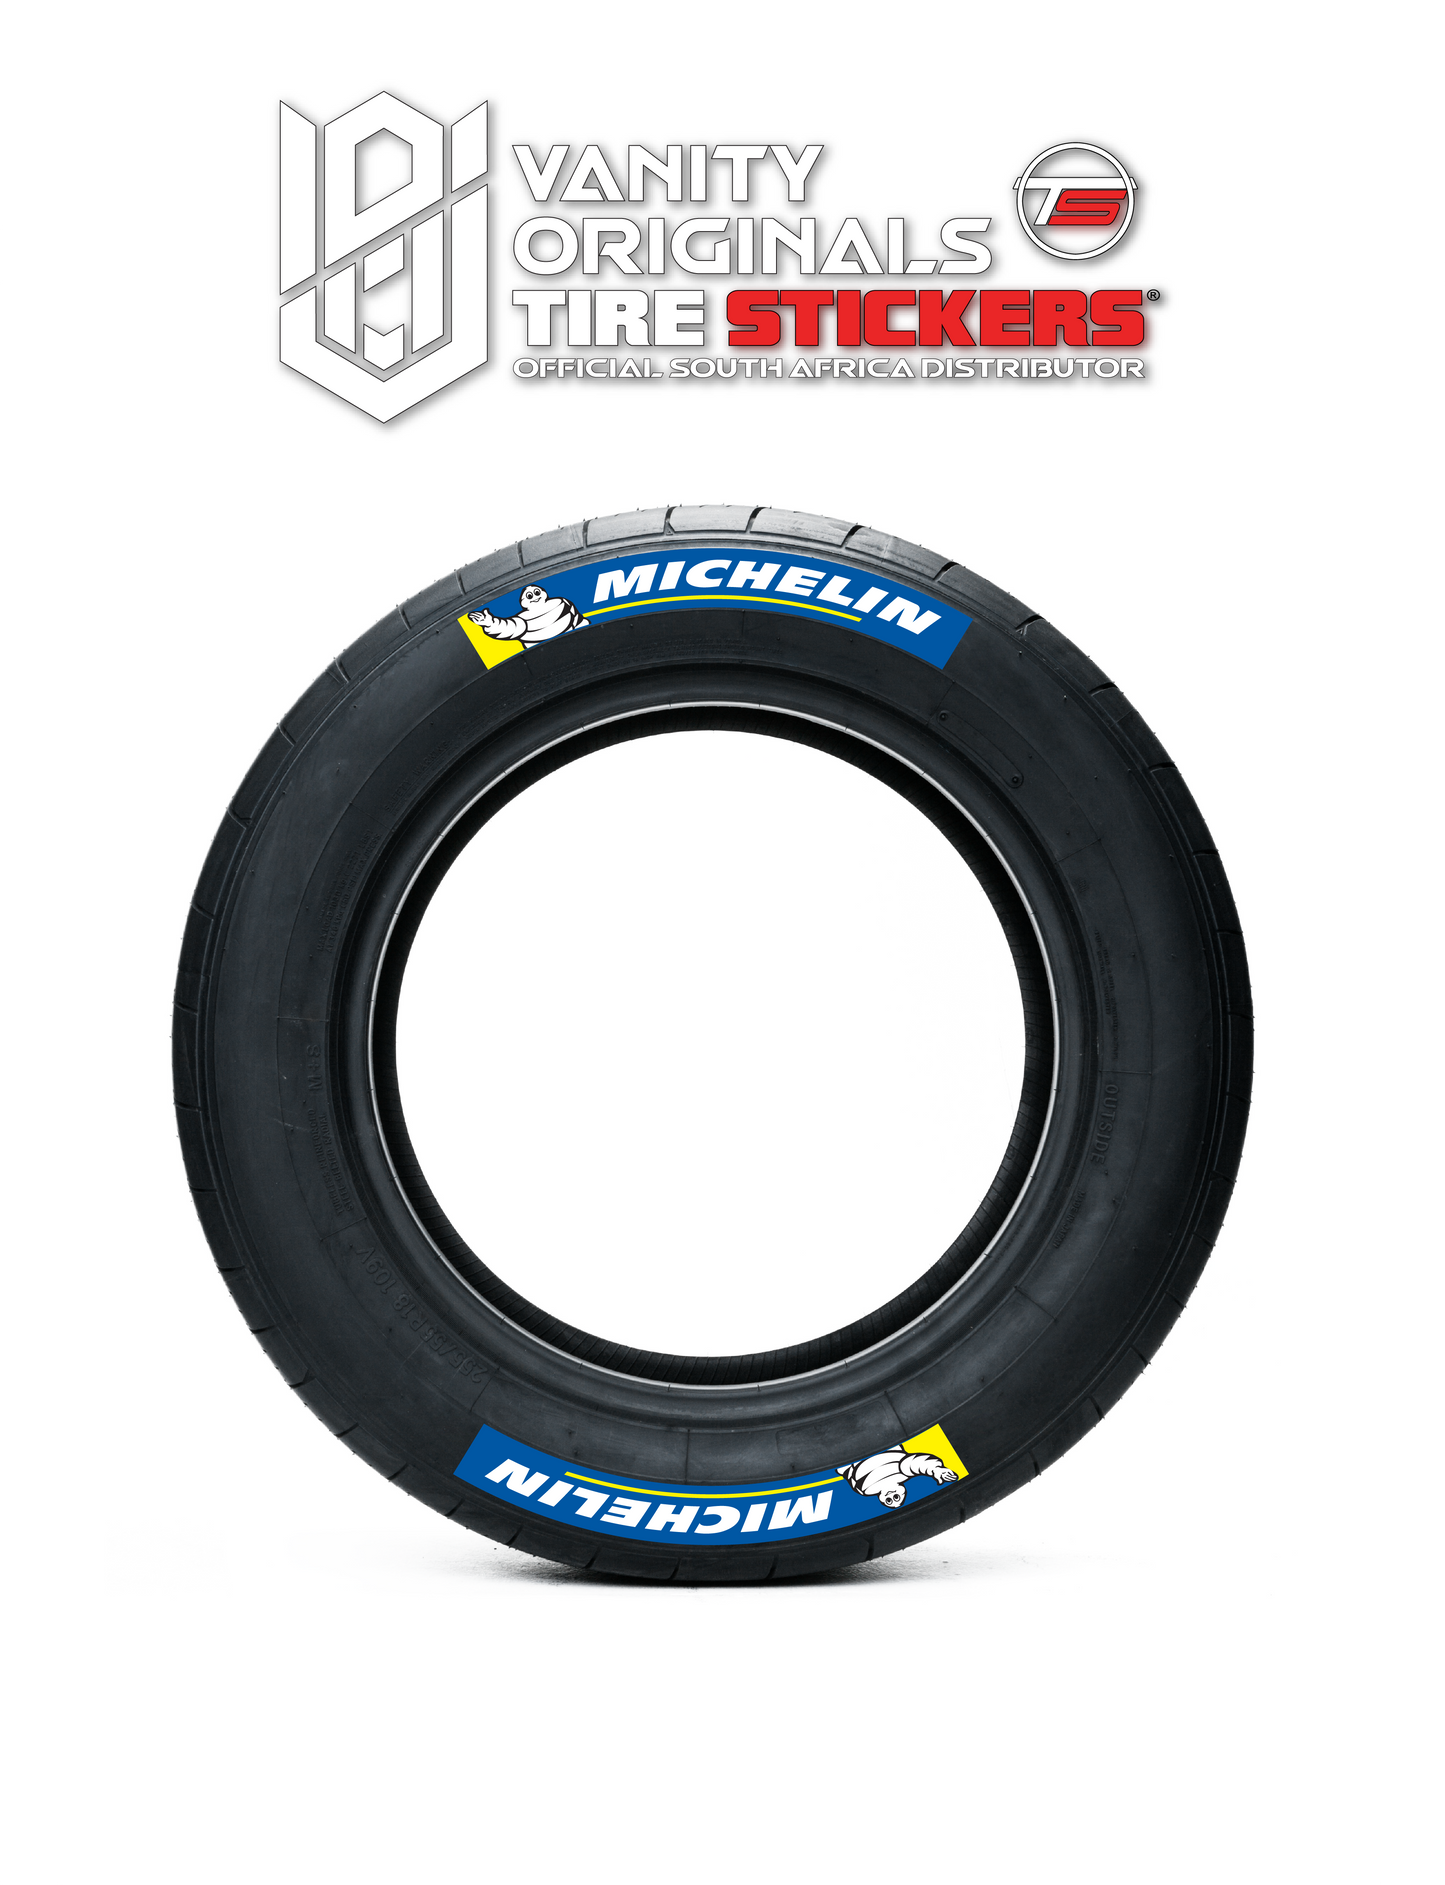 Michelin Layer ( 8x Rubber Decals, Adhesive & Instructions Included )